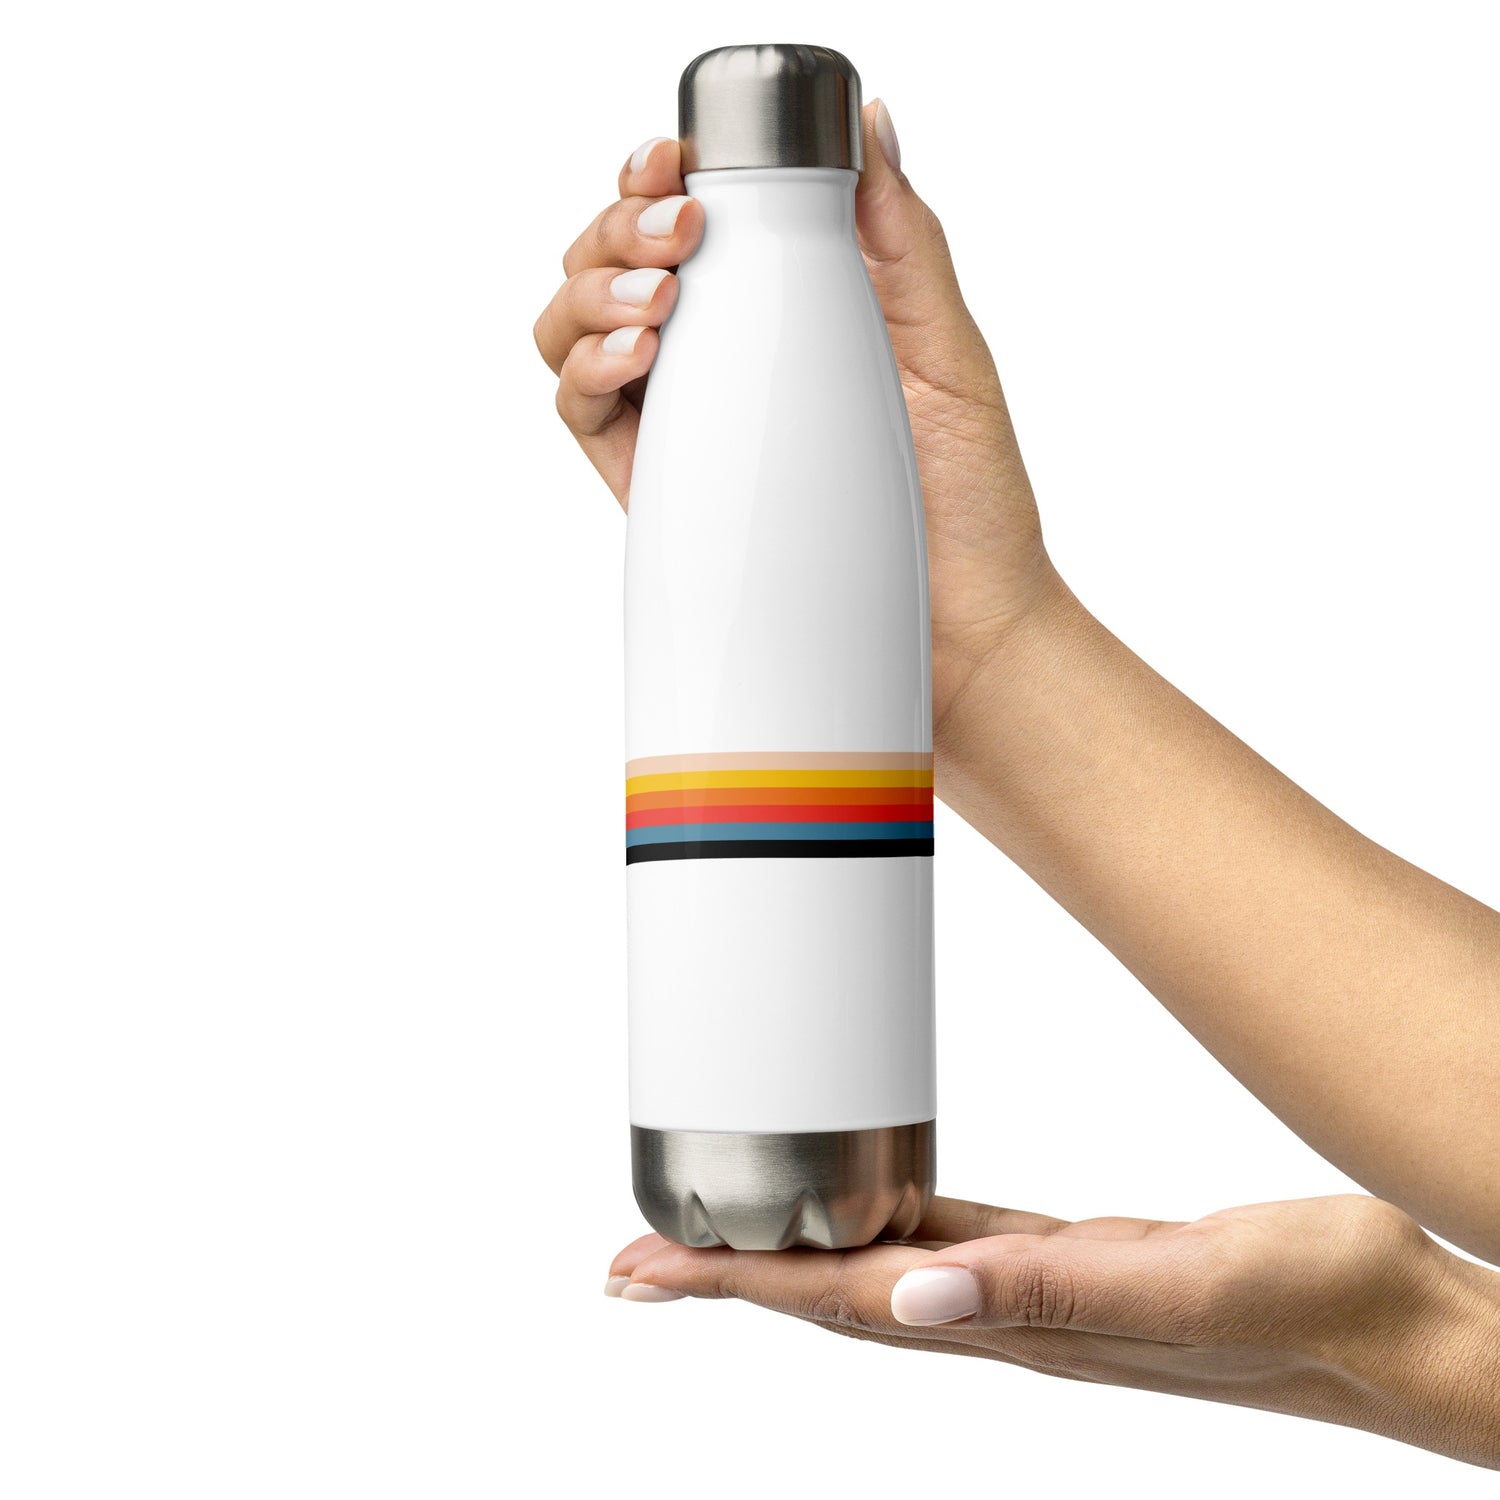 SmartLess Stripes Stainless Steel Water Bottle